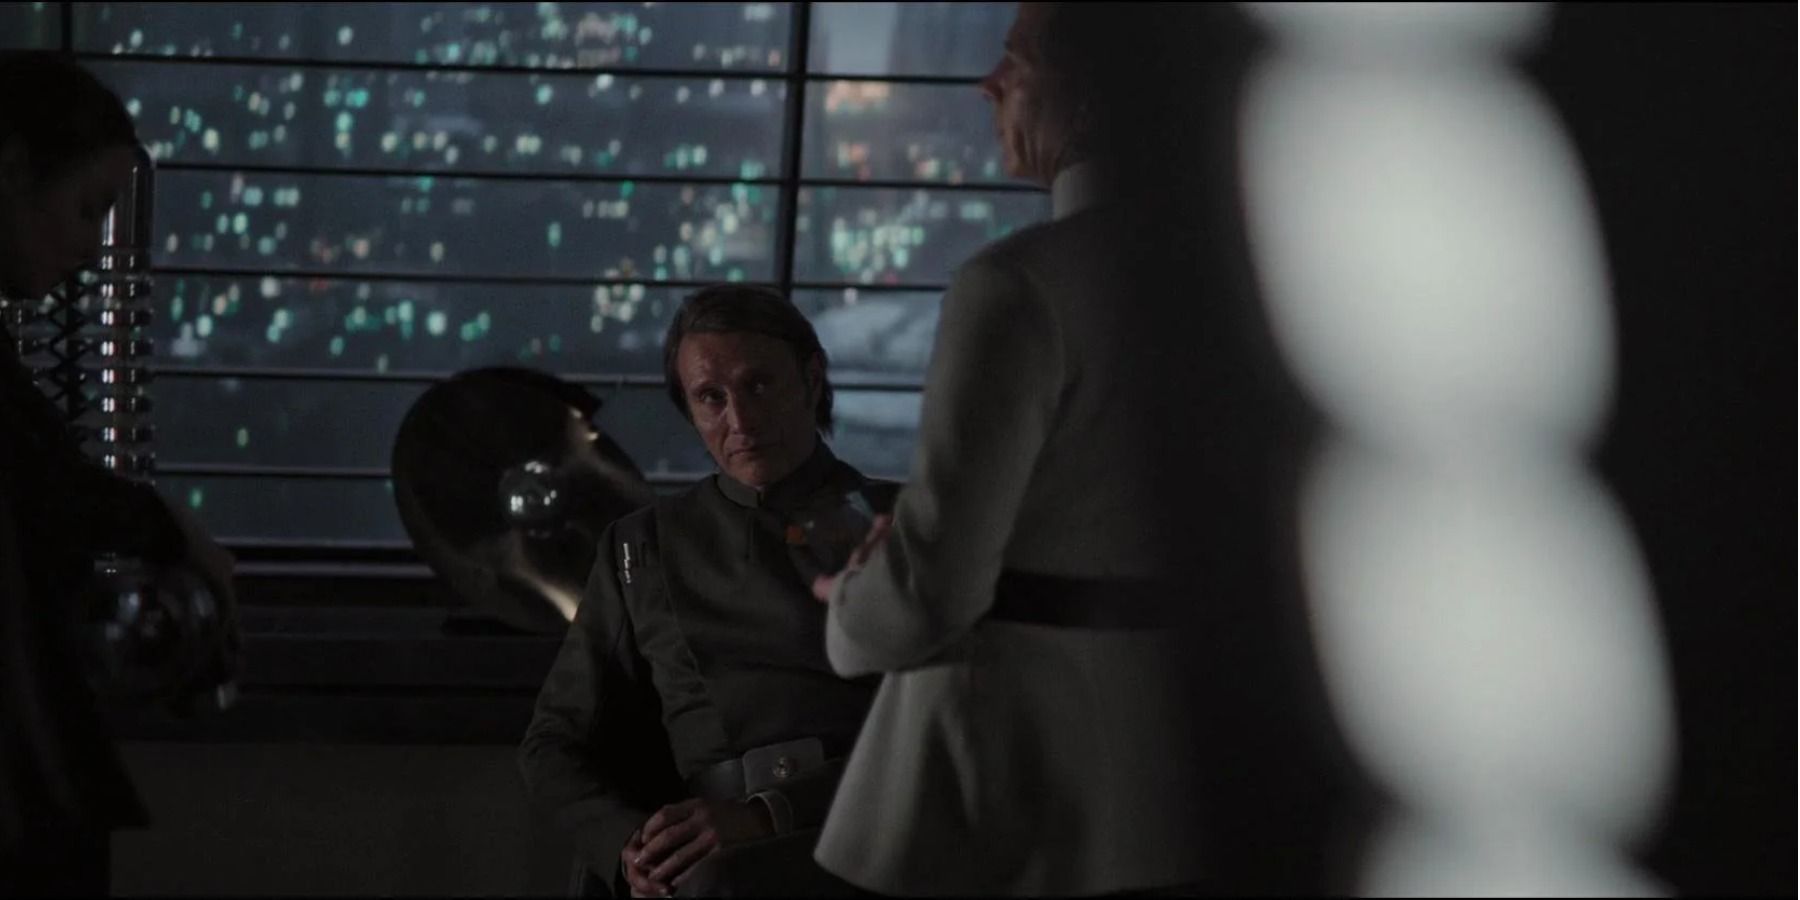 Rogue One flashbacks on Coruscant as Jyn Erso watches her father Galen Erso her mother Lyra Erso and Orson Krennic